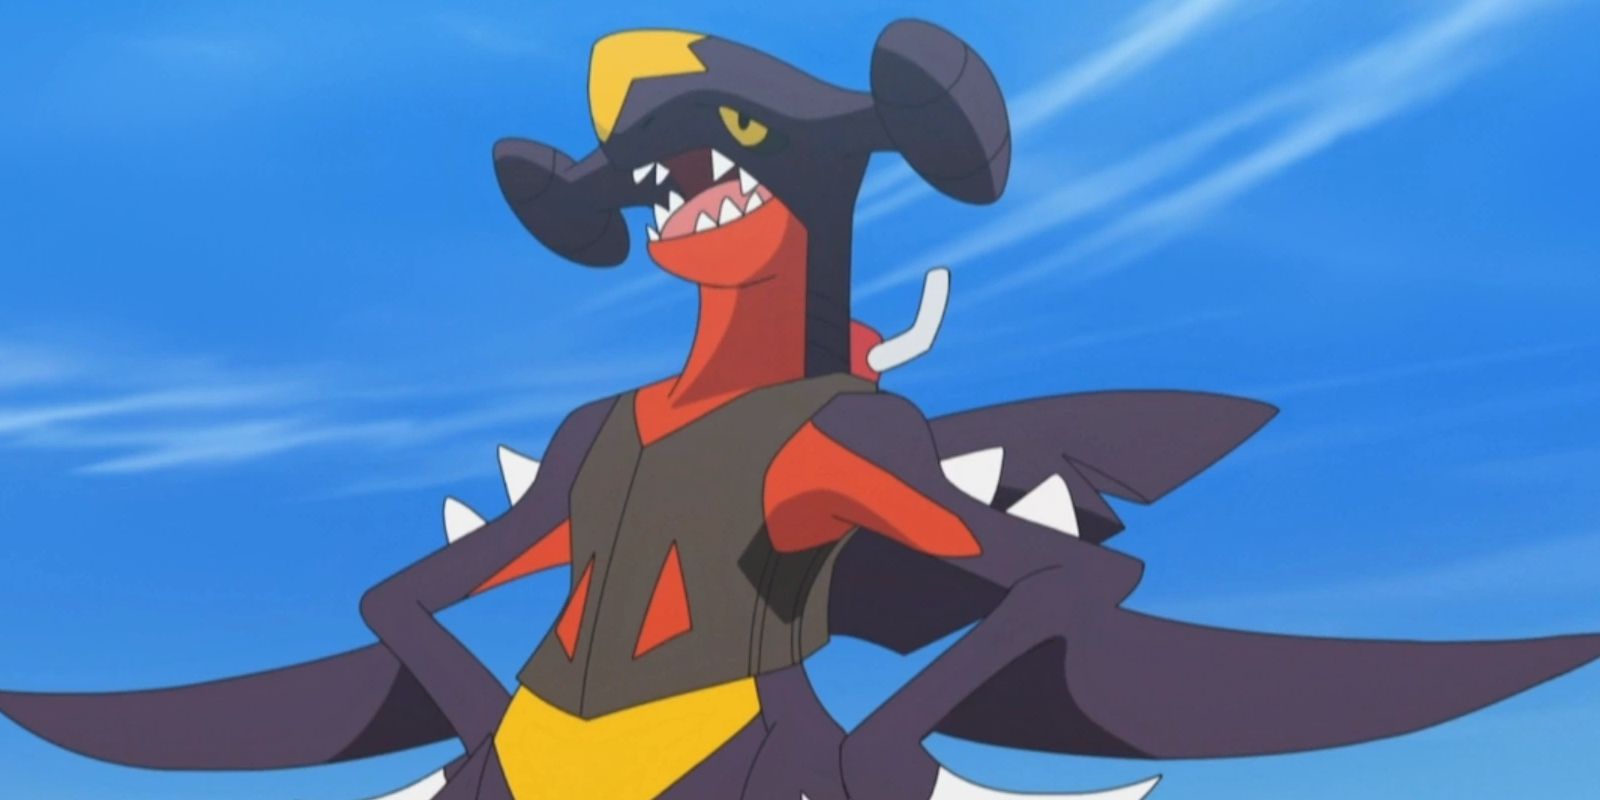 A Garchomp with its arms on its hips in the Pokemon anime.